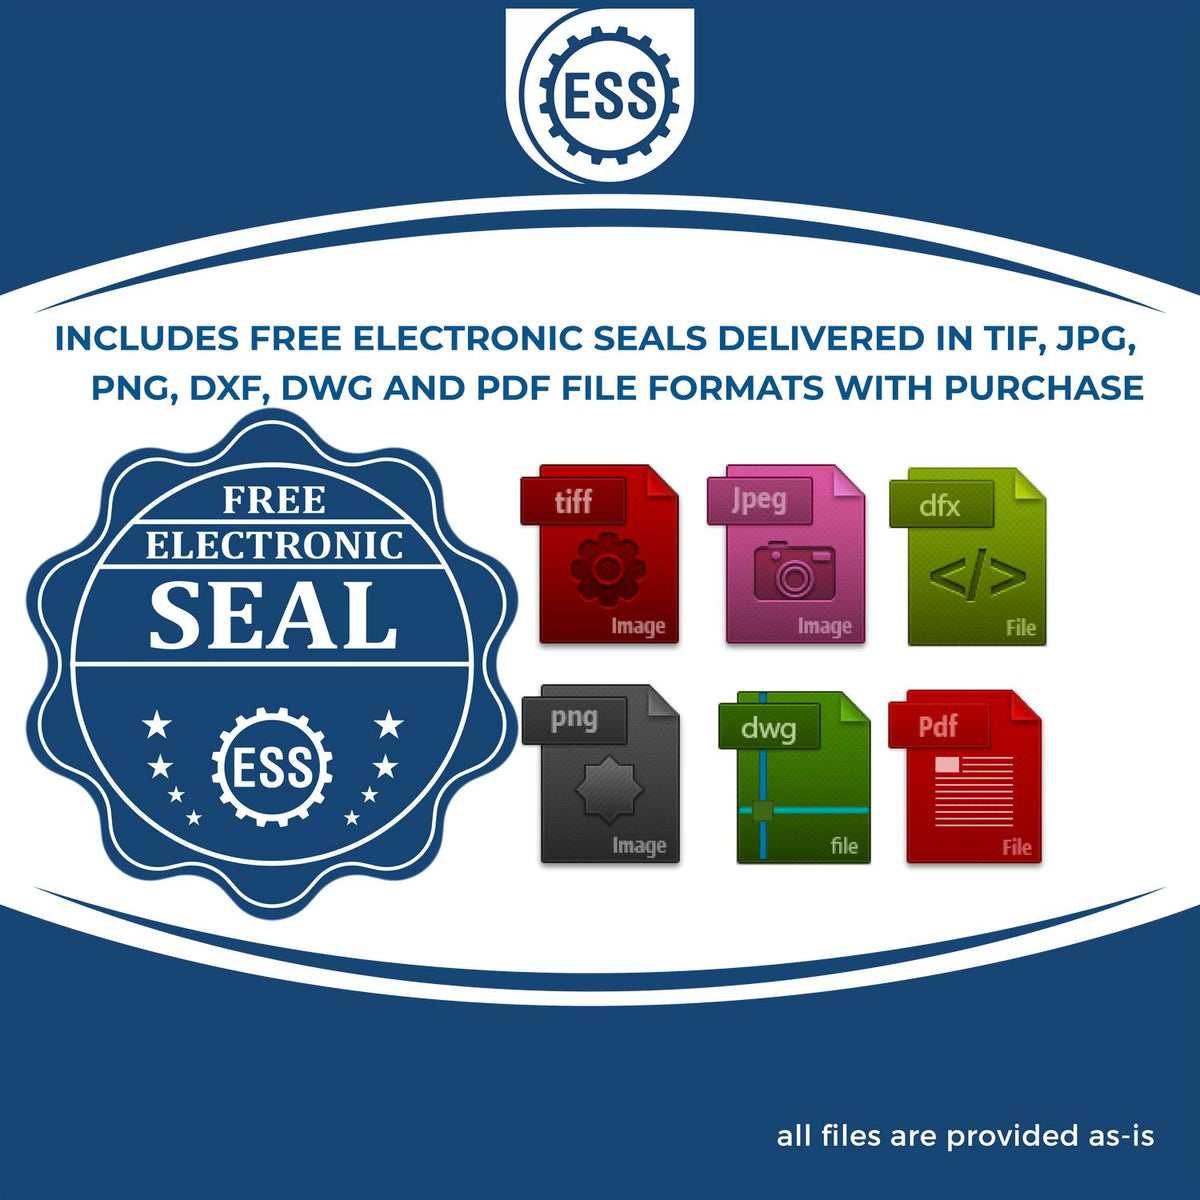 An infographic for the free electronic seal for the Premium MaxLight Pre-Inked Wisconsin Geology Stamp illustrating the different file type icons such as DXF, DWG, TIF, JPG and PNG.